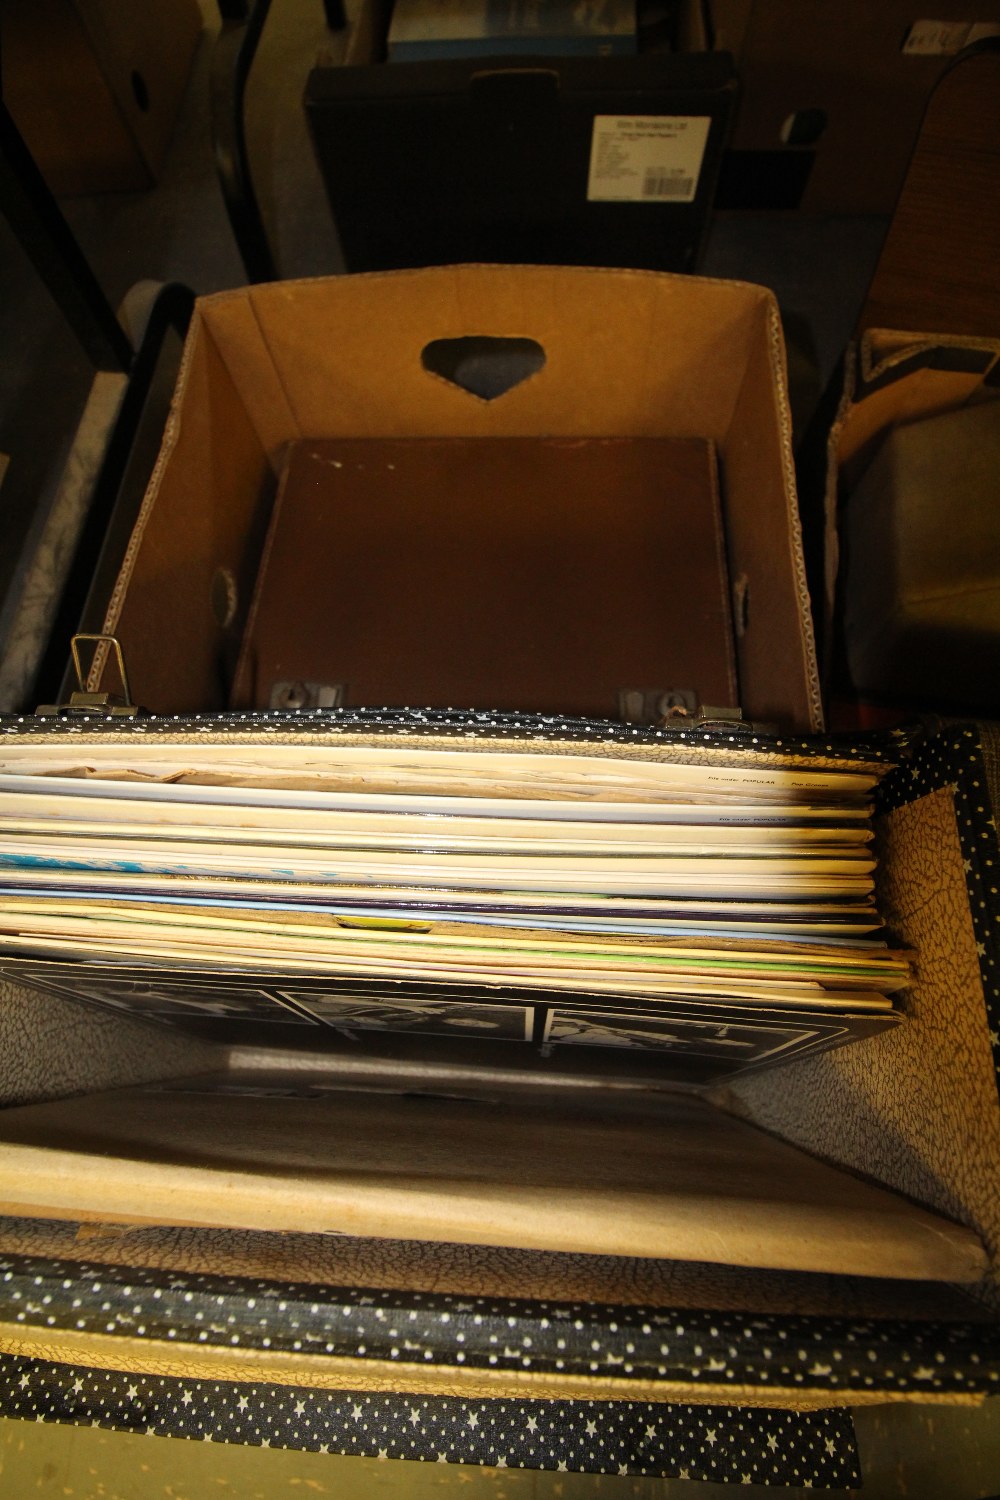 2 Vintage Record Boxes and a Collection of Vinyl and Old 78's Shellac